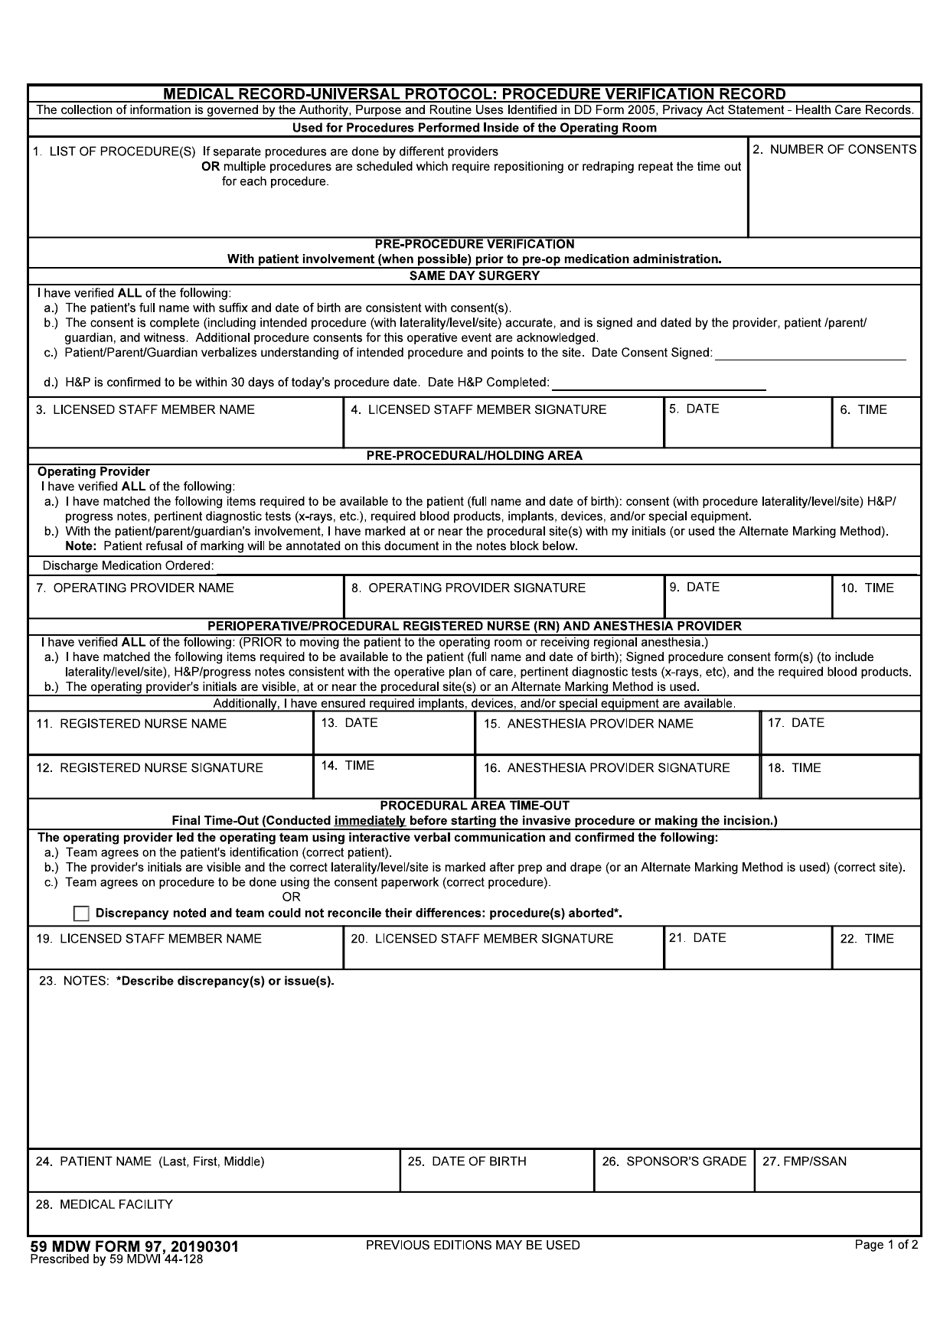 59 MDW Form 97 Medical Record - Universal Protocol - Procedure Verification Record, Page 1